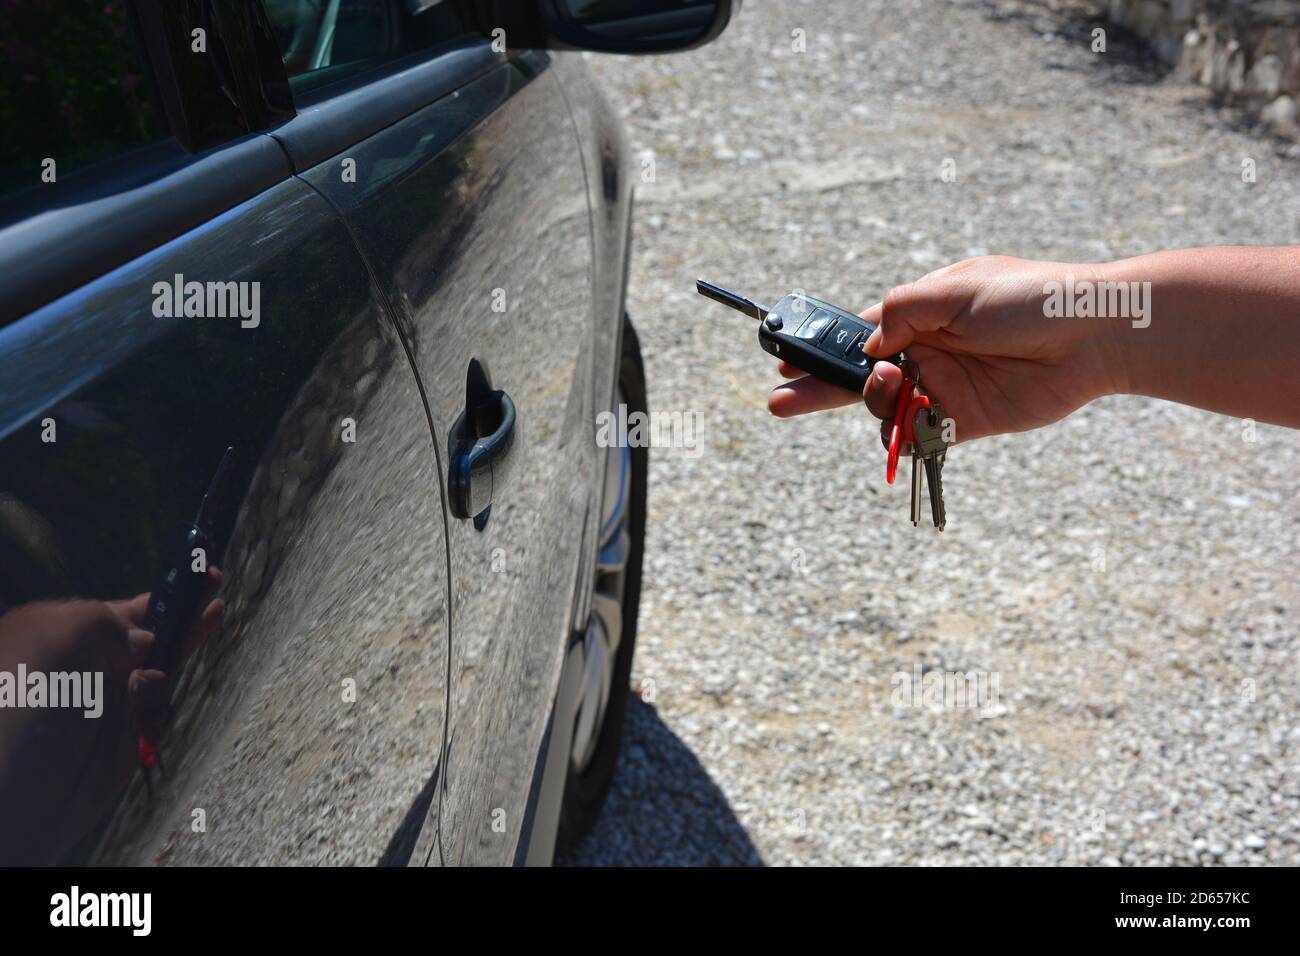 Person using a remote wireless car key to unlock or lock a vehicle, Stock Photo